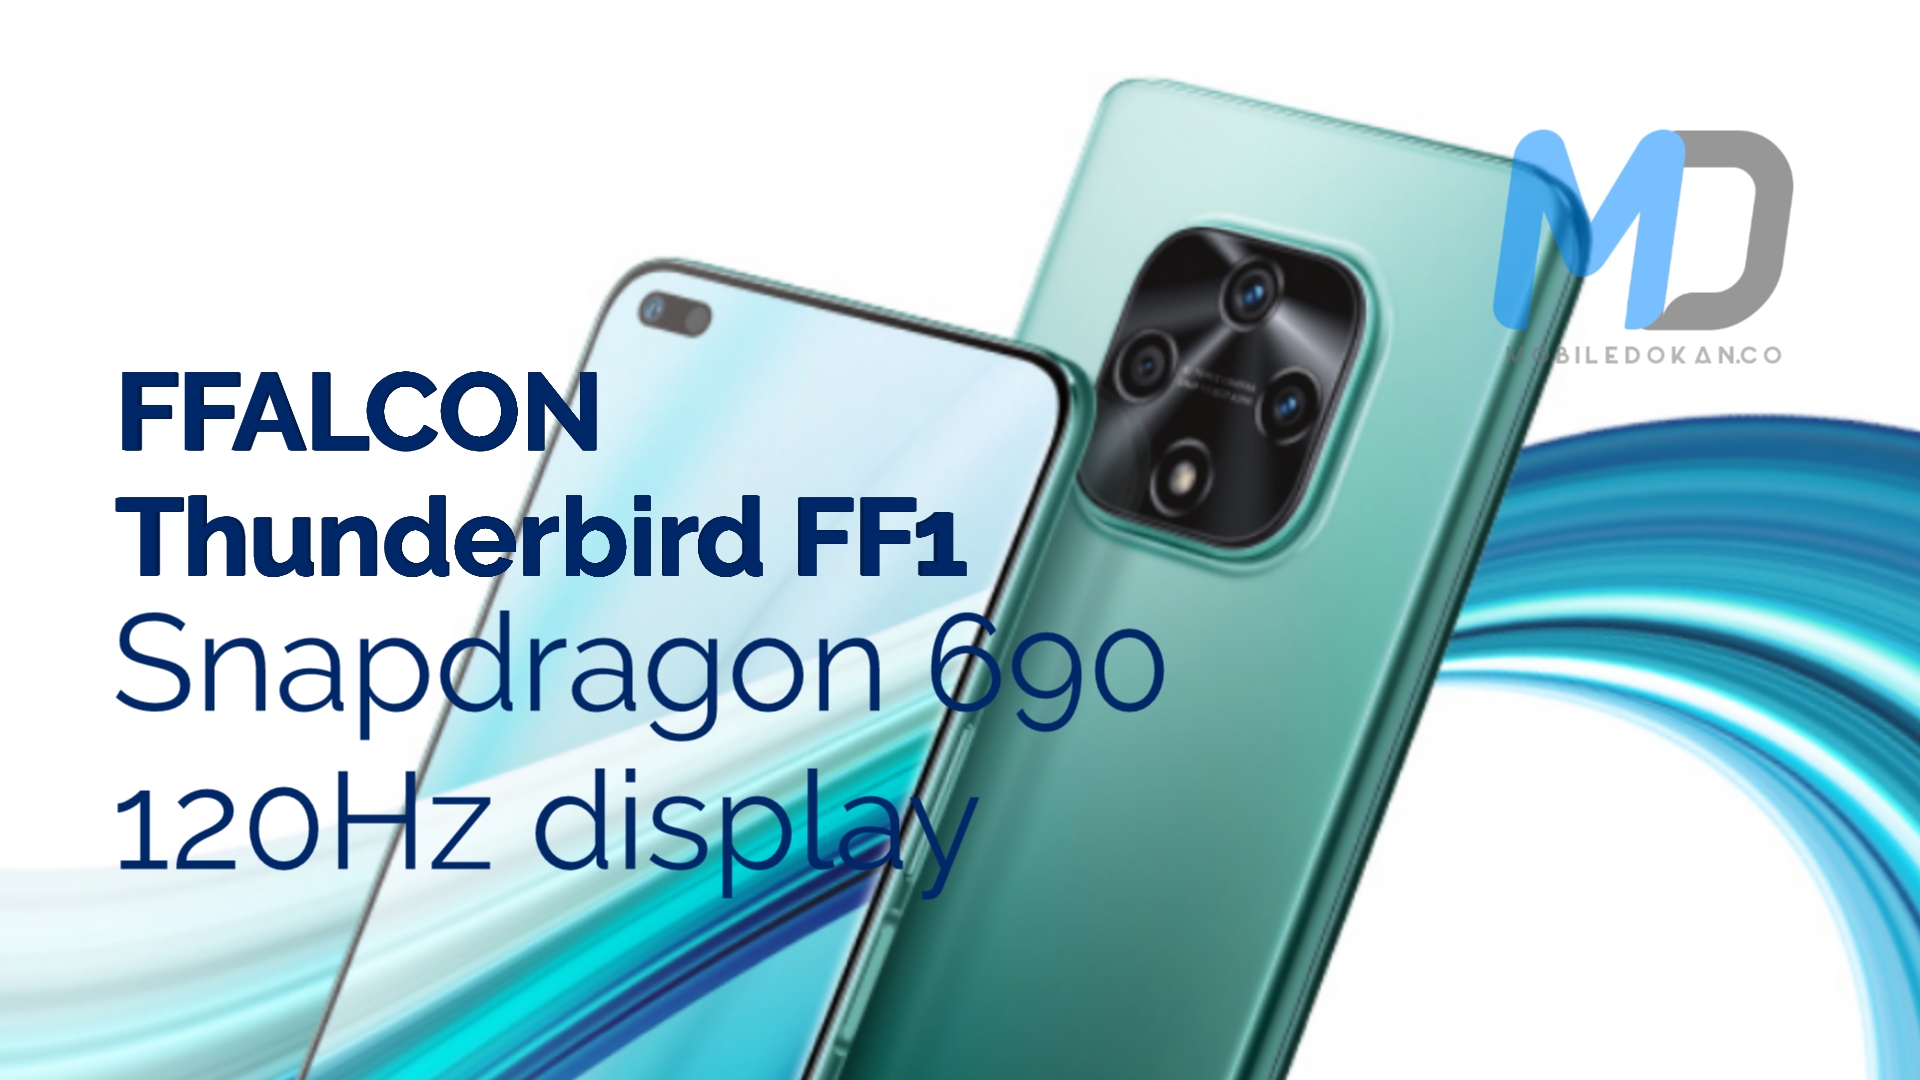 FFALCON Thunderbird FF1 with Snapdragon 690 and 120Hz display